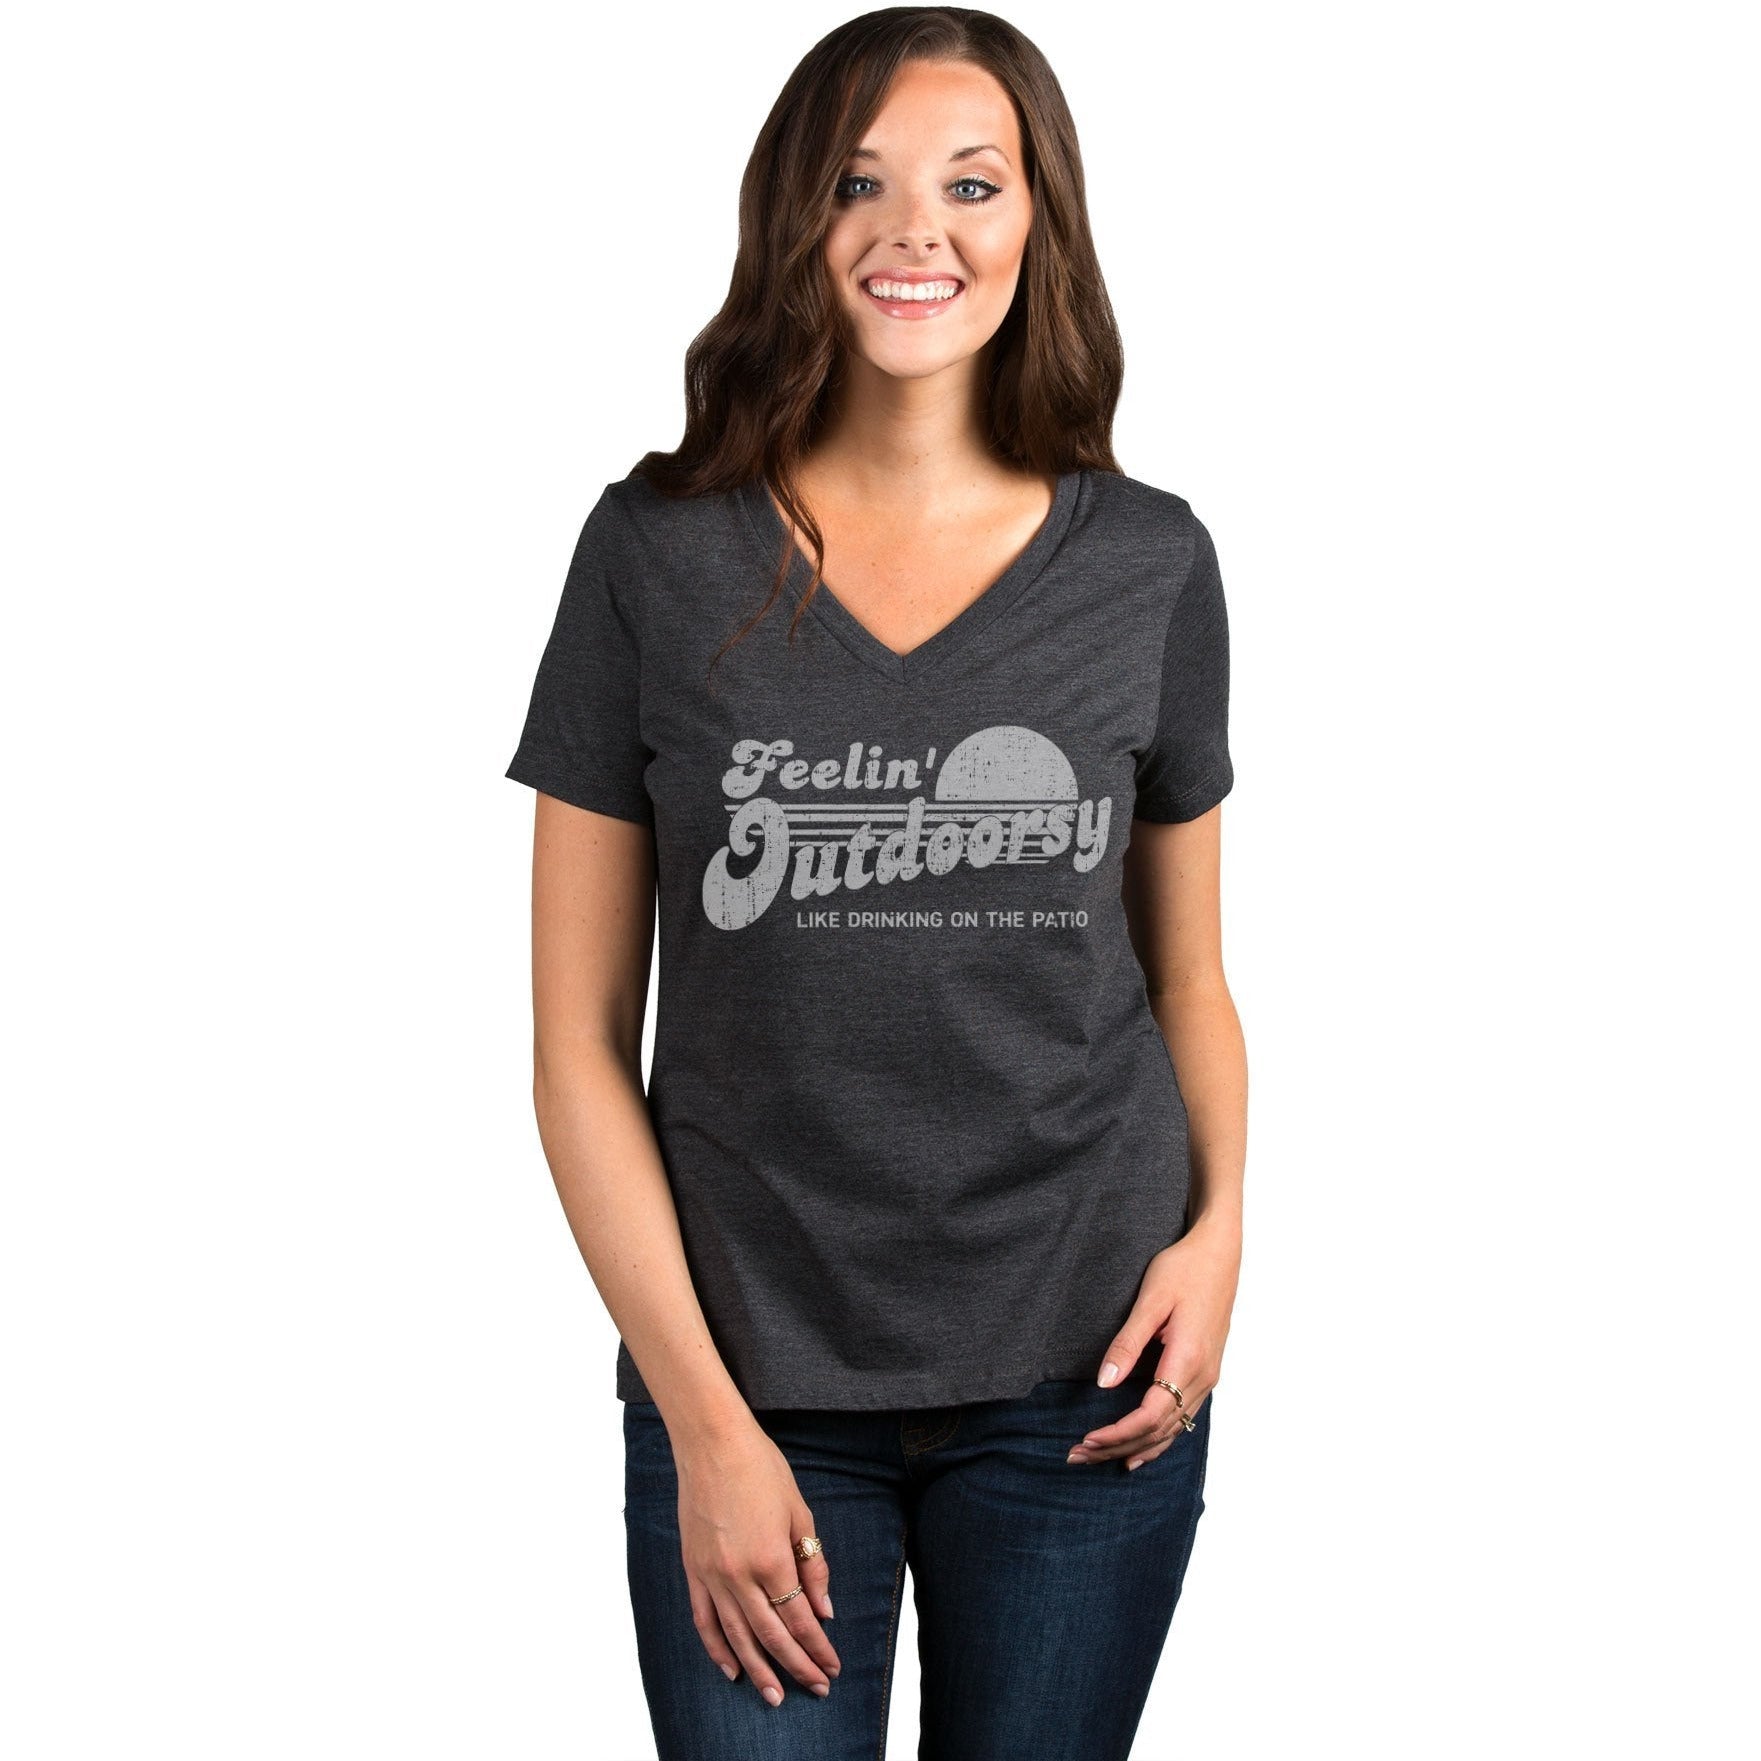 Feelin Outdoorsy Like Drinking On The Patio Women's Relaxed Crewneck T-Shirt Top Tee Charcoal Grey Model